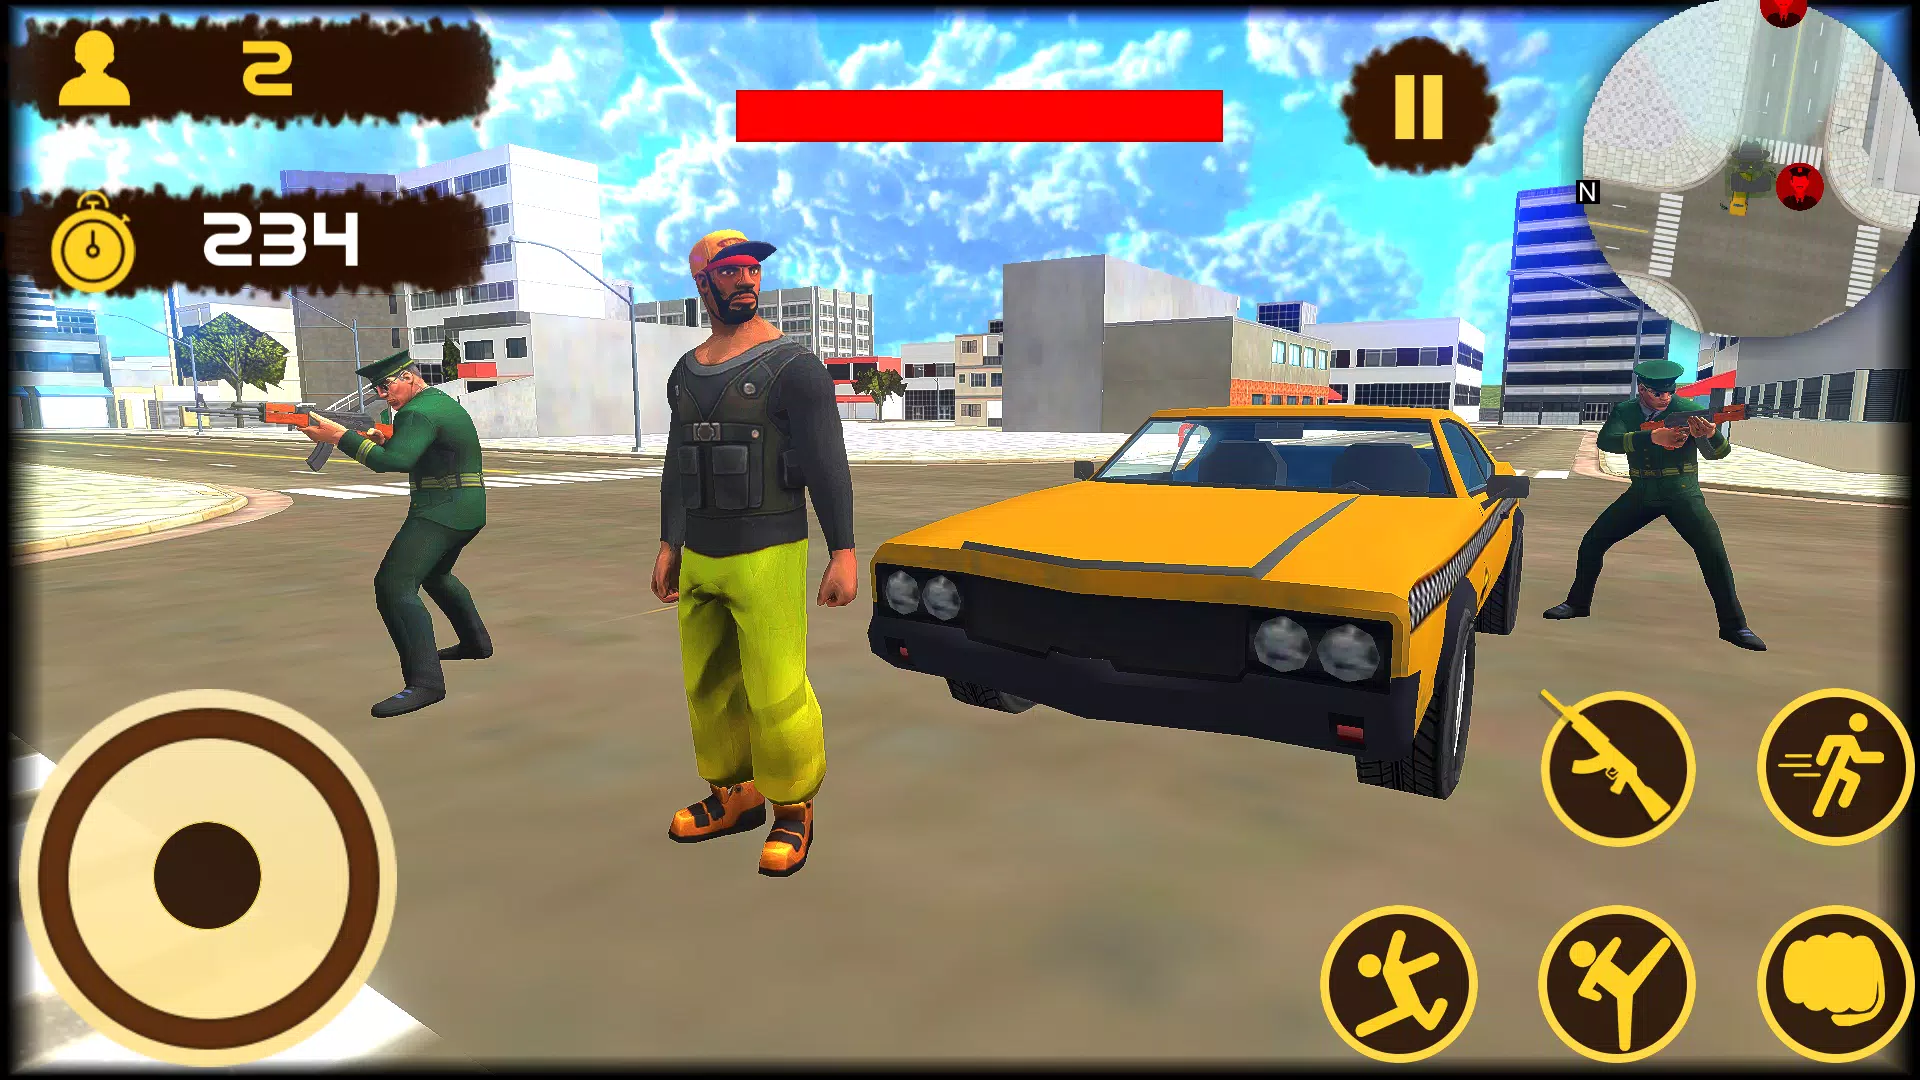 Grand Gangster City Battle : Auto Theft Games 2021 APK para Android -  Download